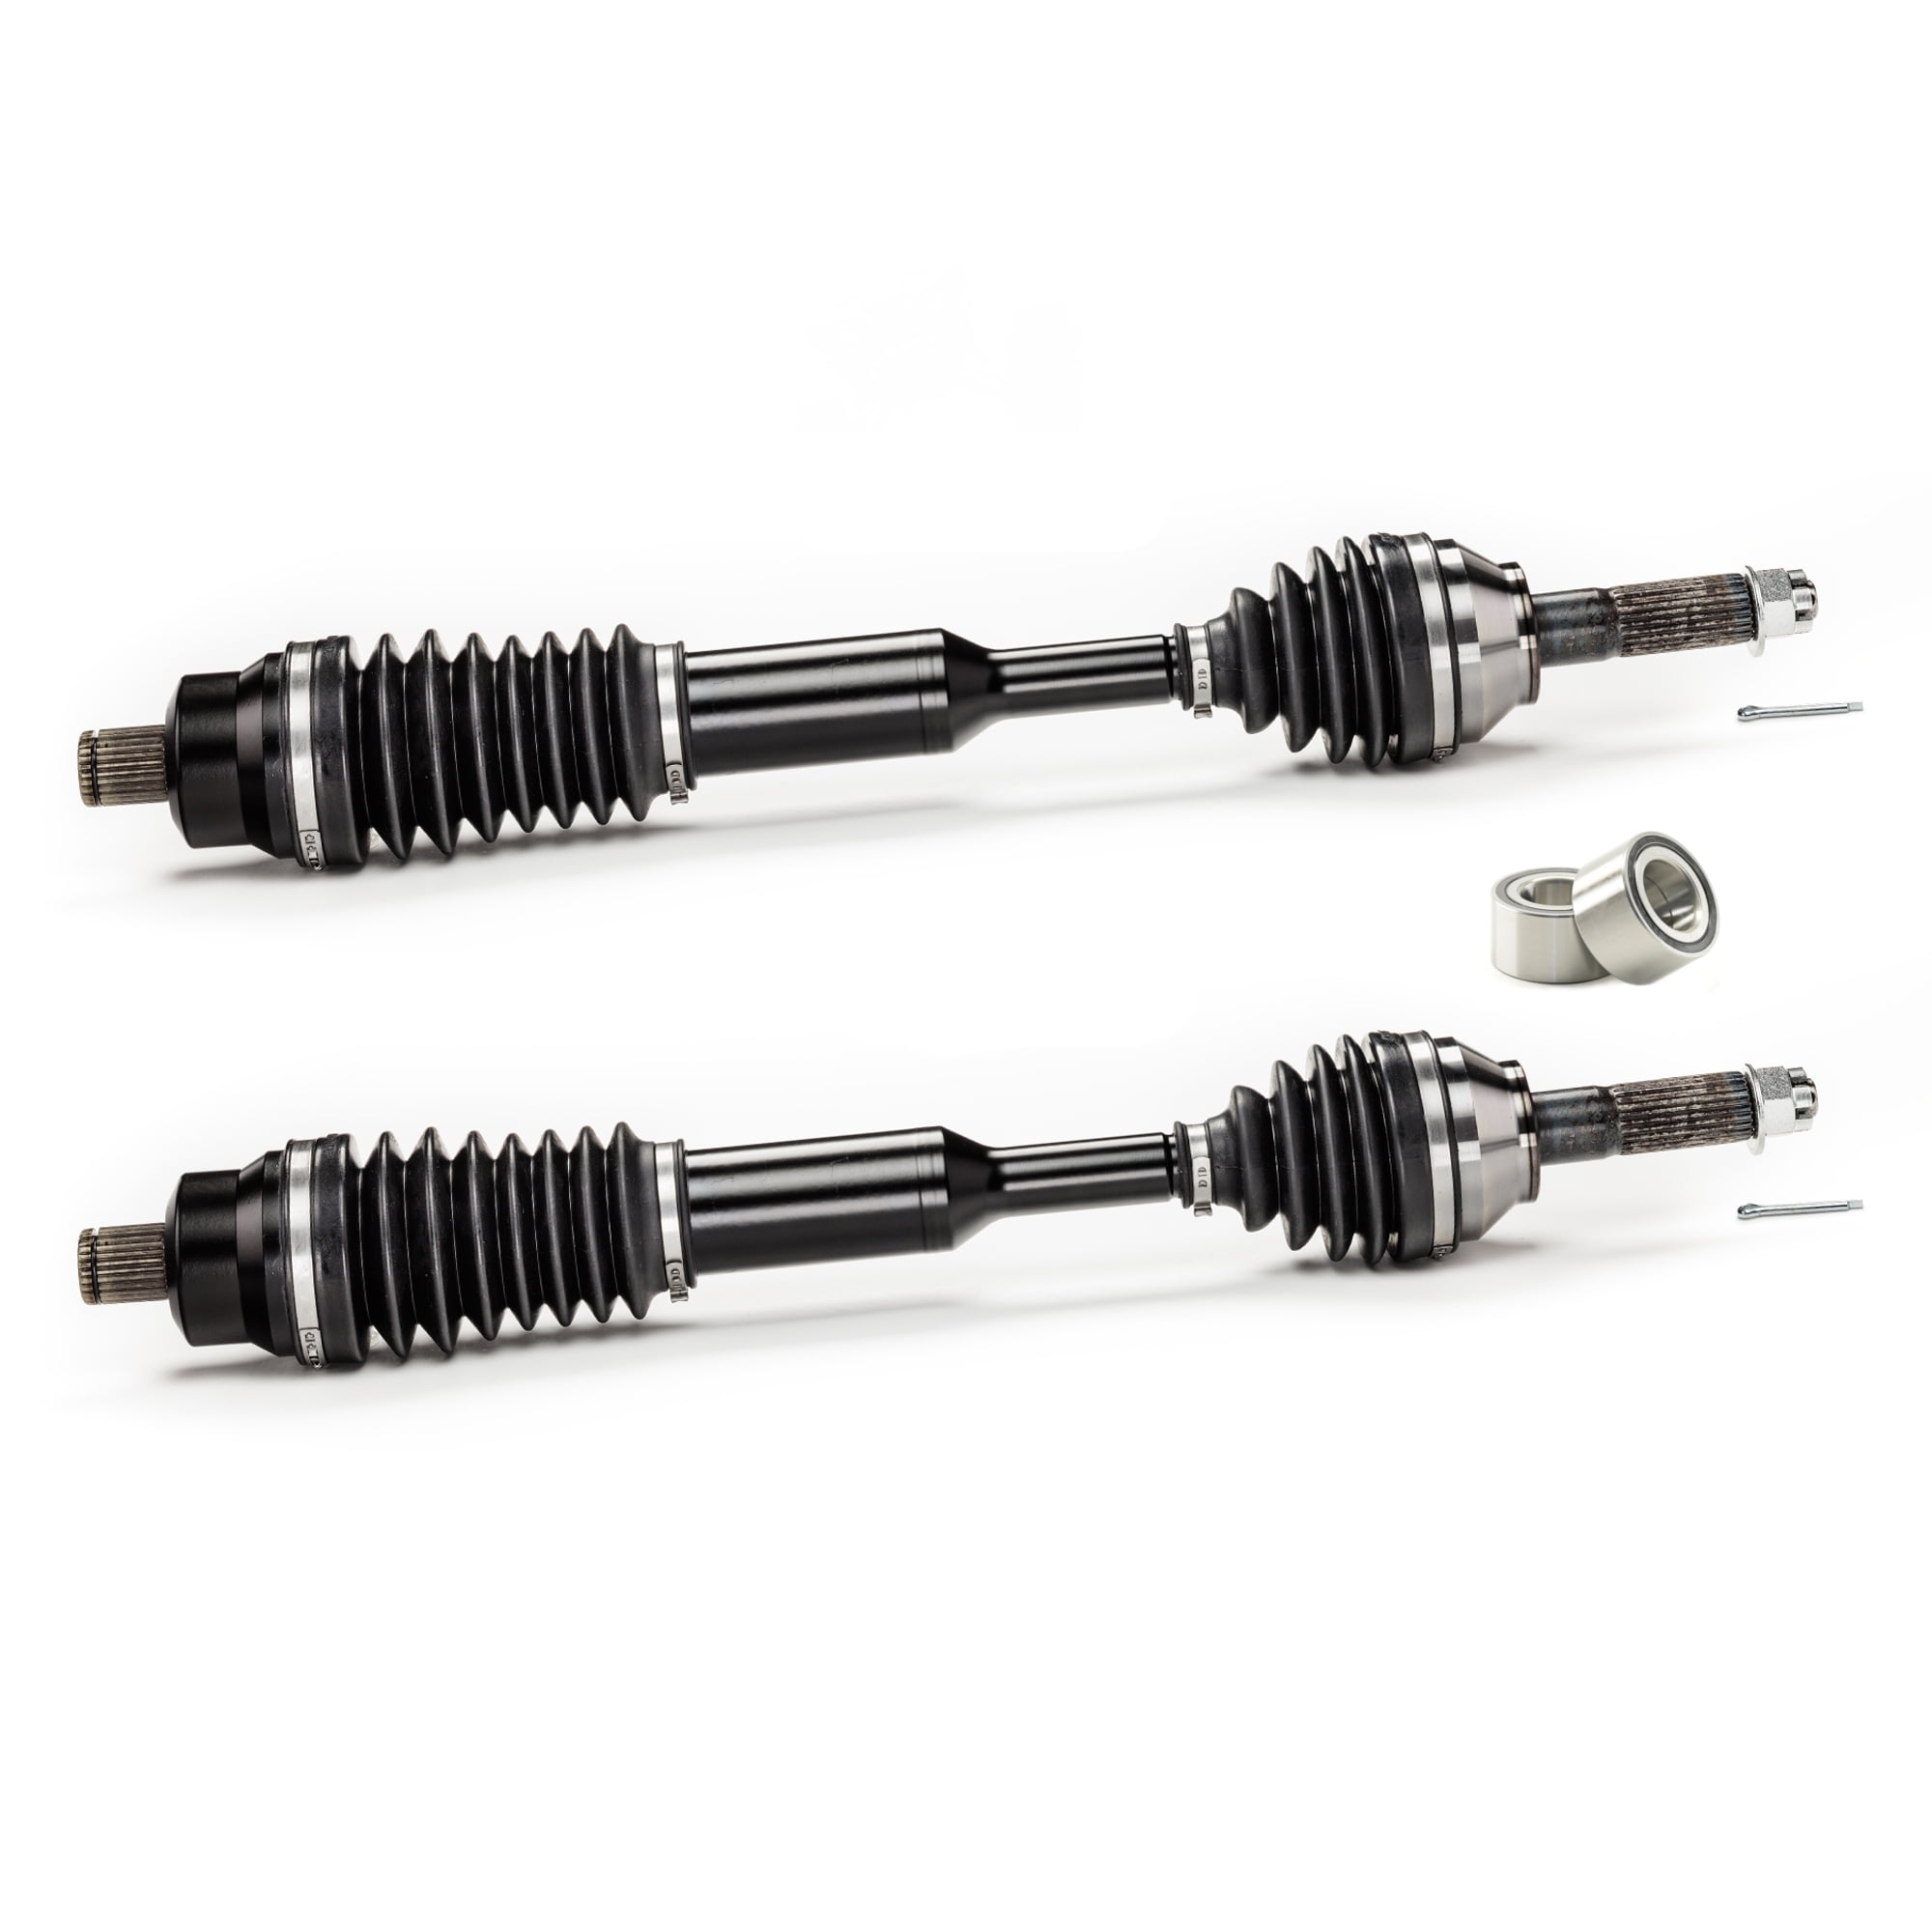 Pair of Front CV Axle Shafts for Polaris Ranger 400 2010-2014 4x4 